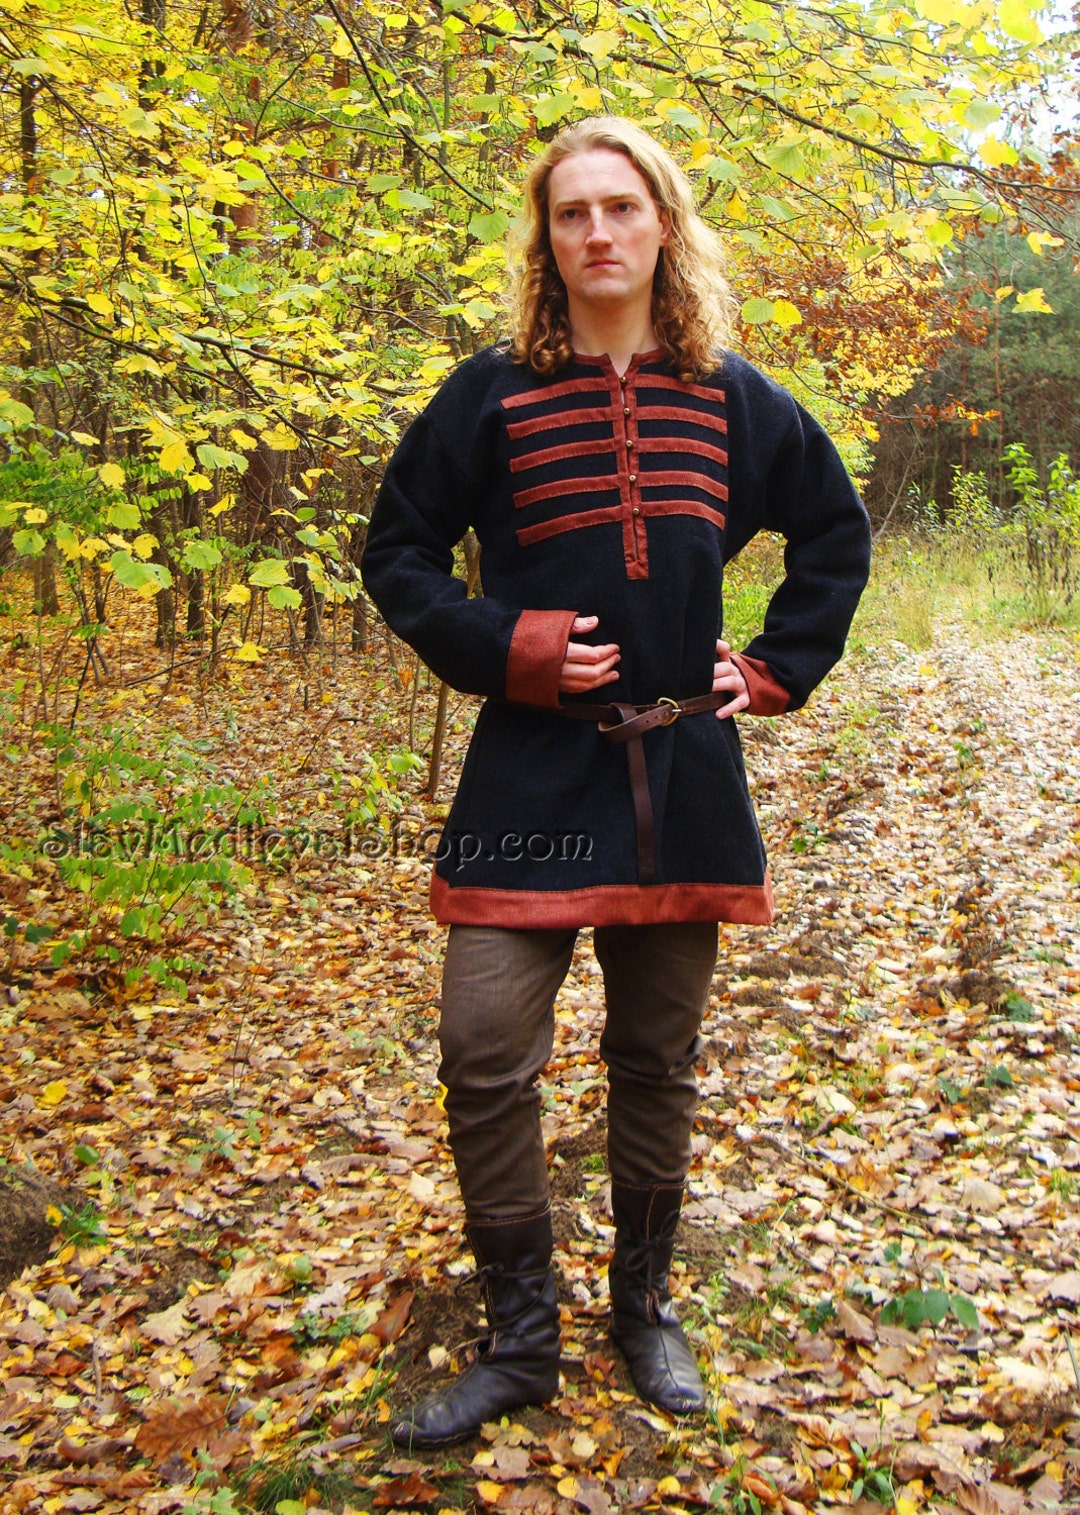 Early Medieval Wool Tunic-coat With Bronze Buttons for Viking Man Costume  Medieval Wollen Tunic for Historical Reenactment -  Canada